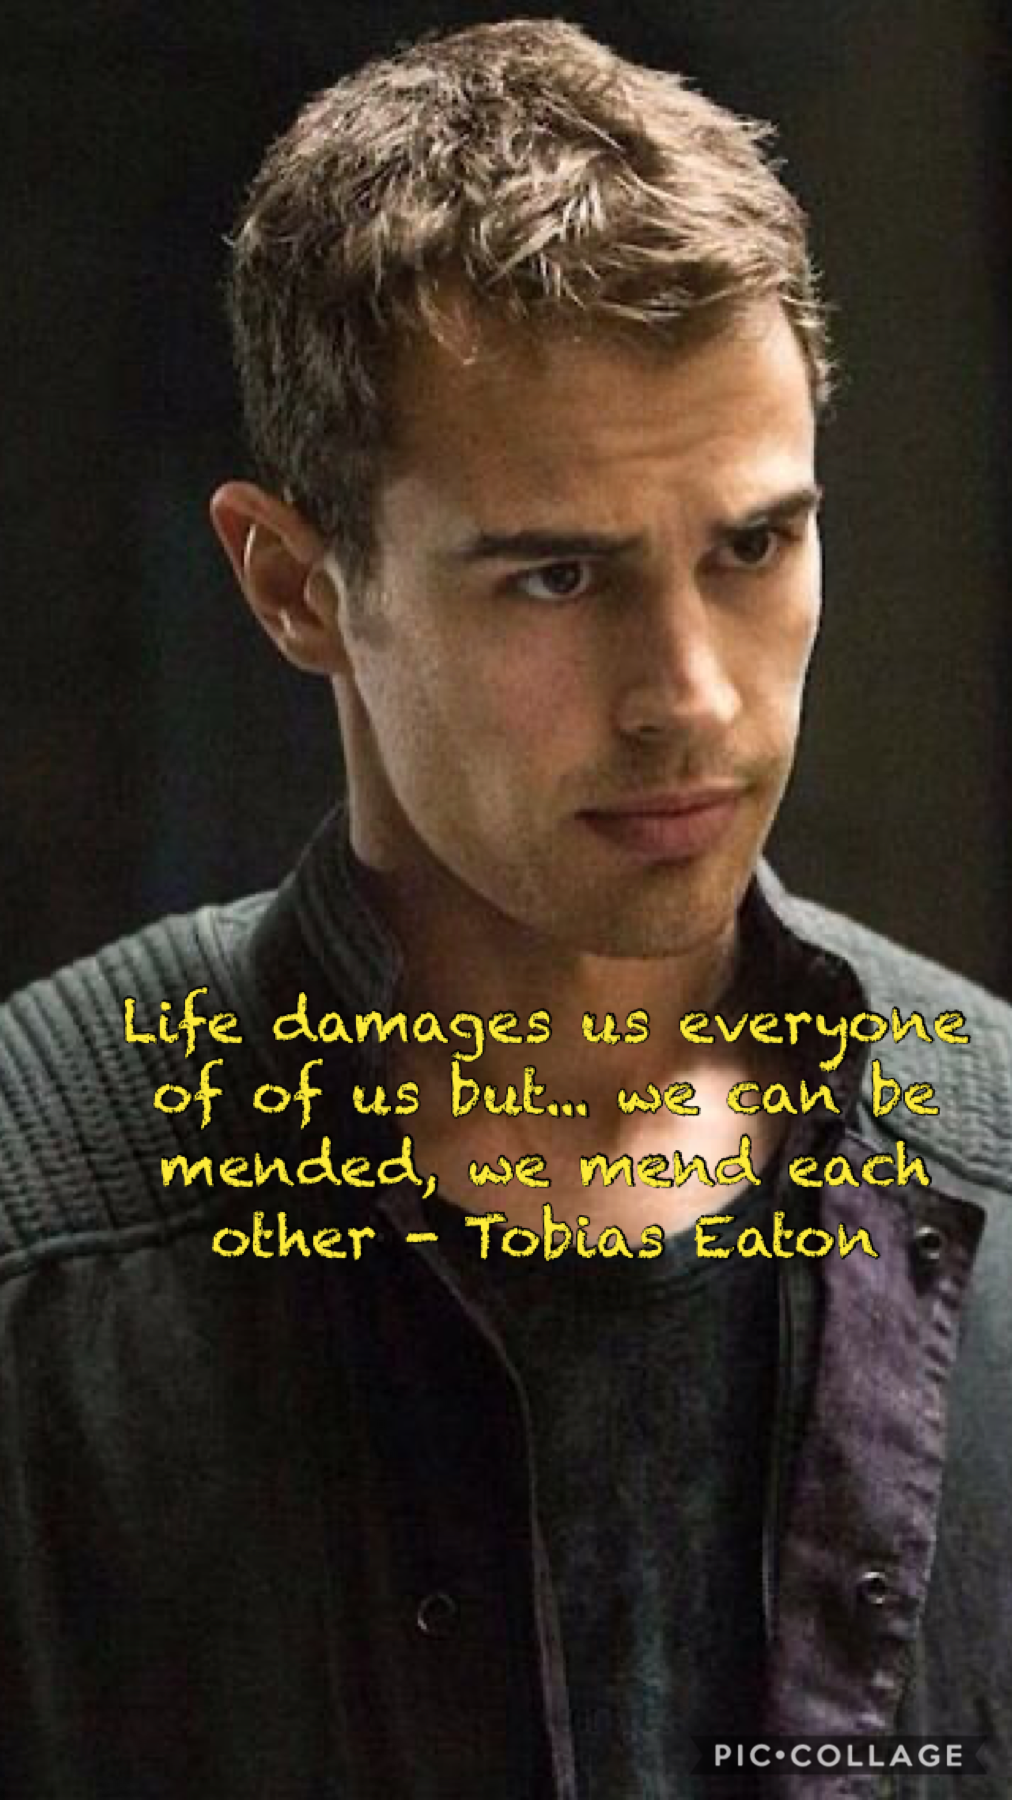 Just something meaningful from Tobias  #divergent #fourtris